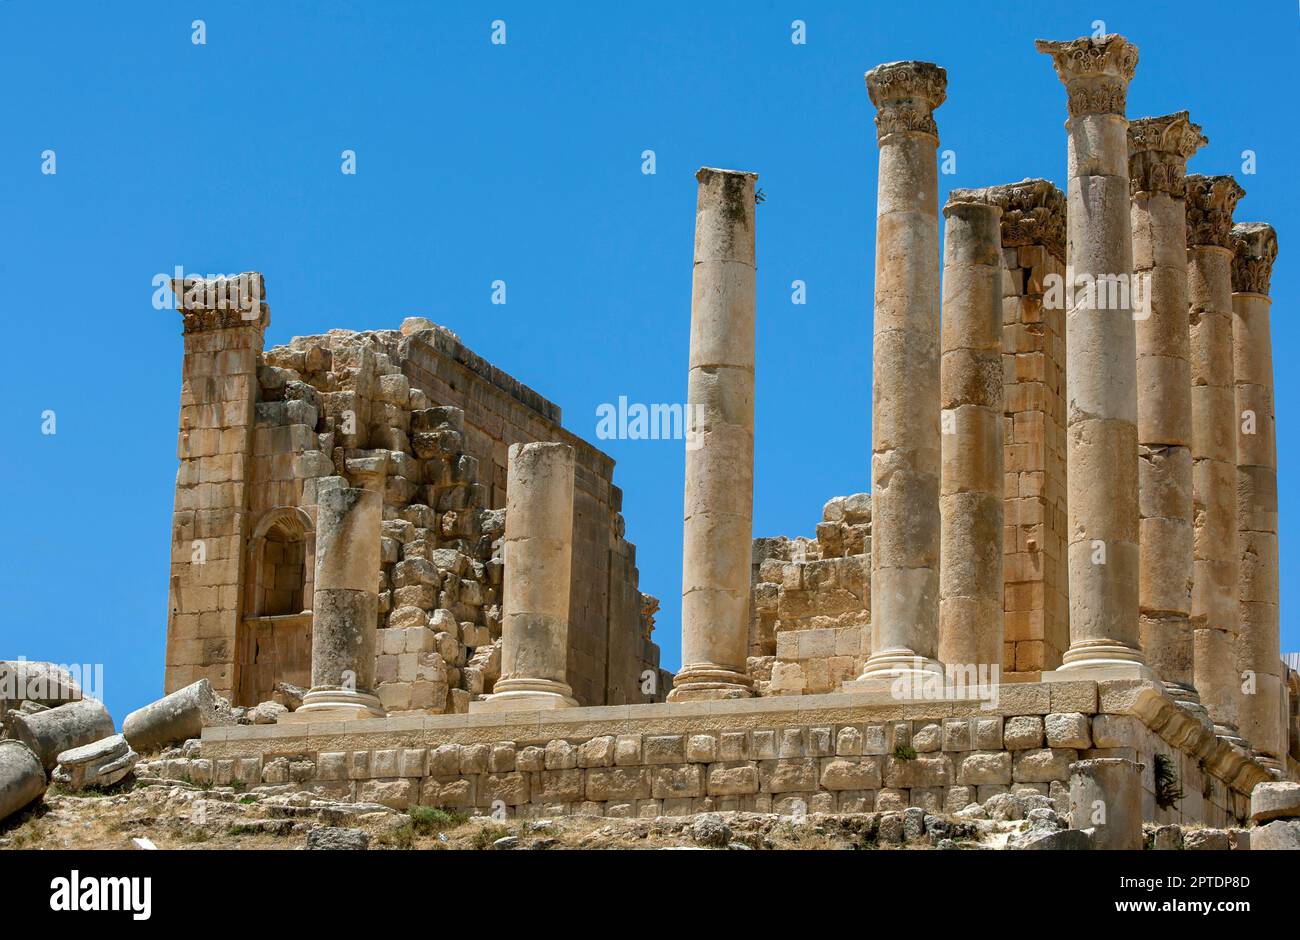 The Hellenistic Naos at the ancient site of Jarash in Jordan. It was built by Theon in 69/70 AD on the lower terrace of the Sanctuary of Zeus. Stock Photo